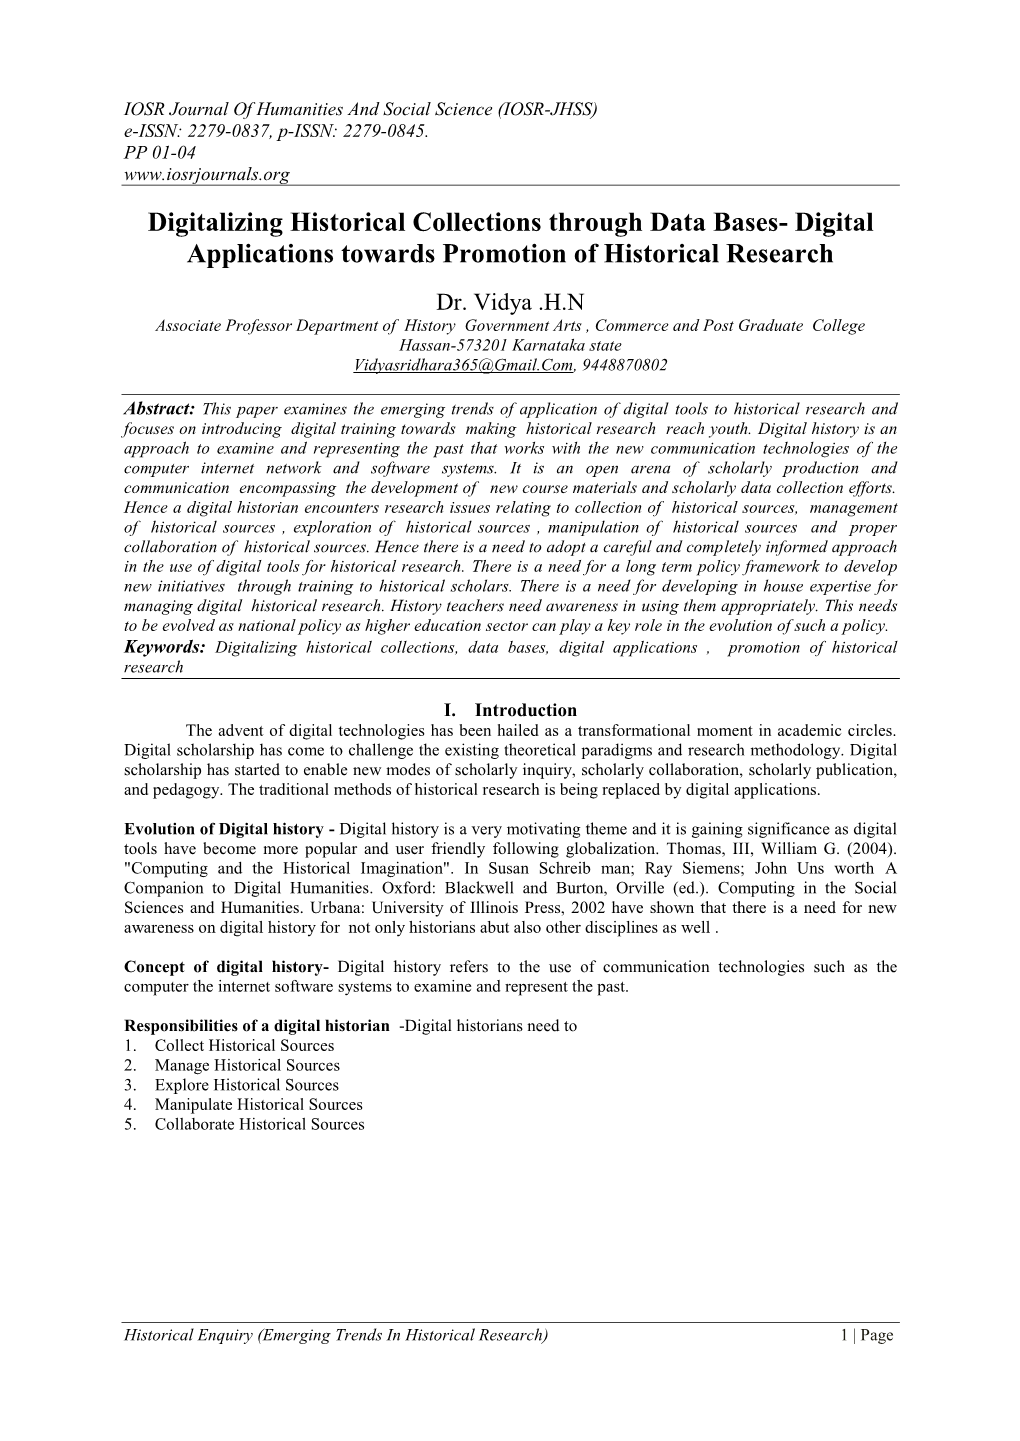 Digitalizing Historical Collections Through Data Bases- Digital Applications Towards Promotion of Historical Research